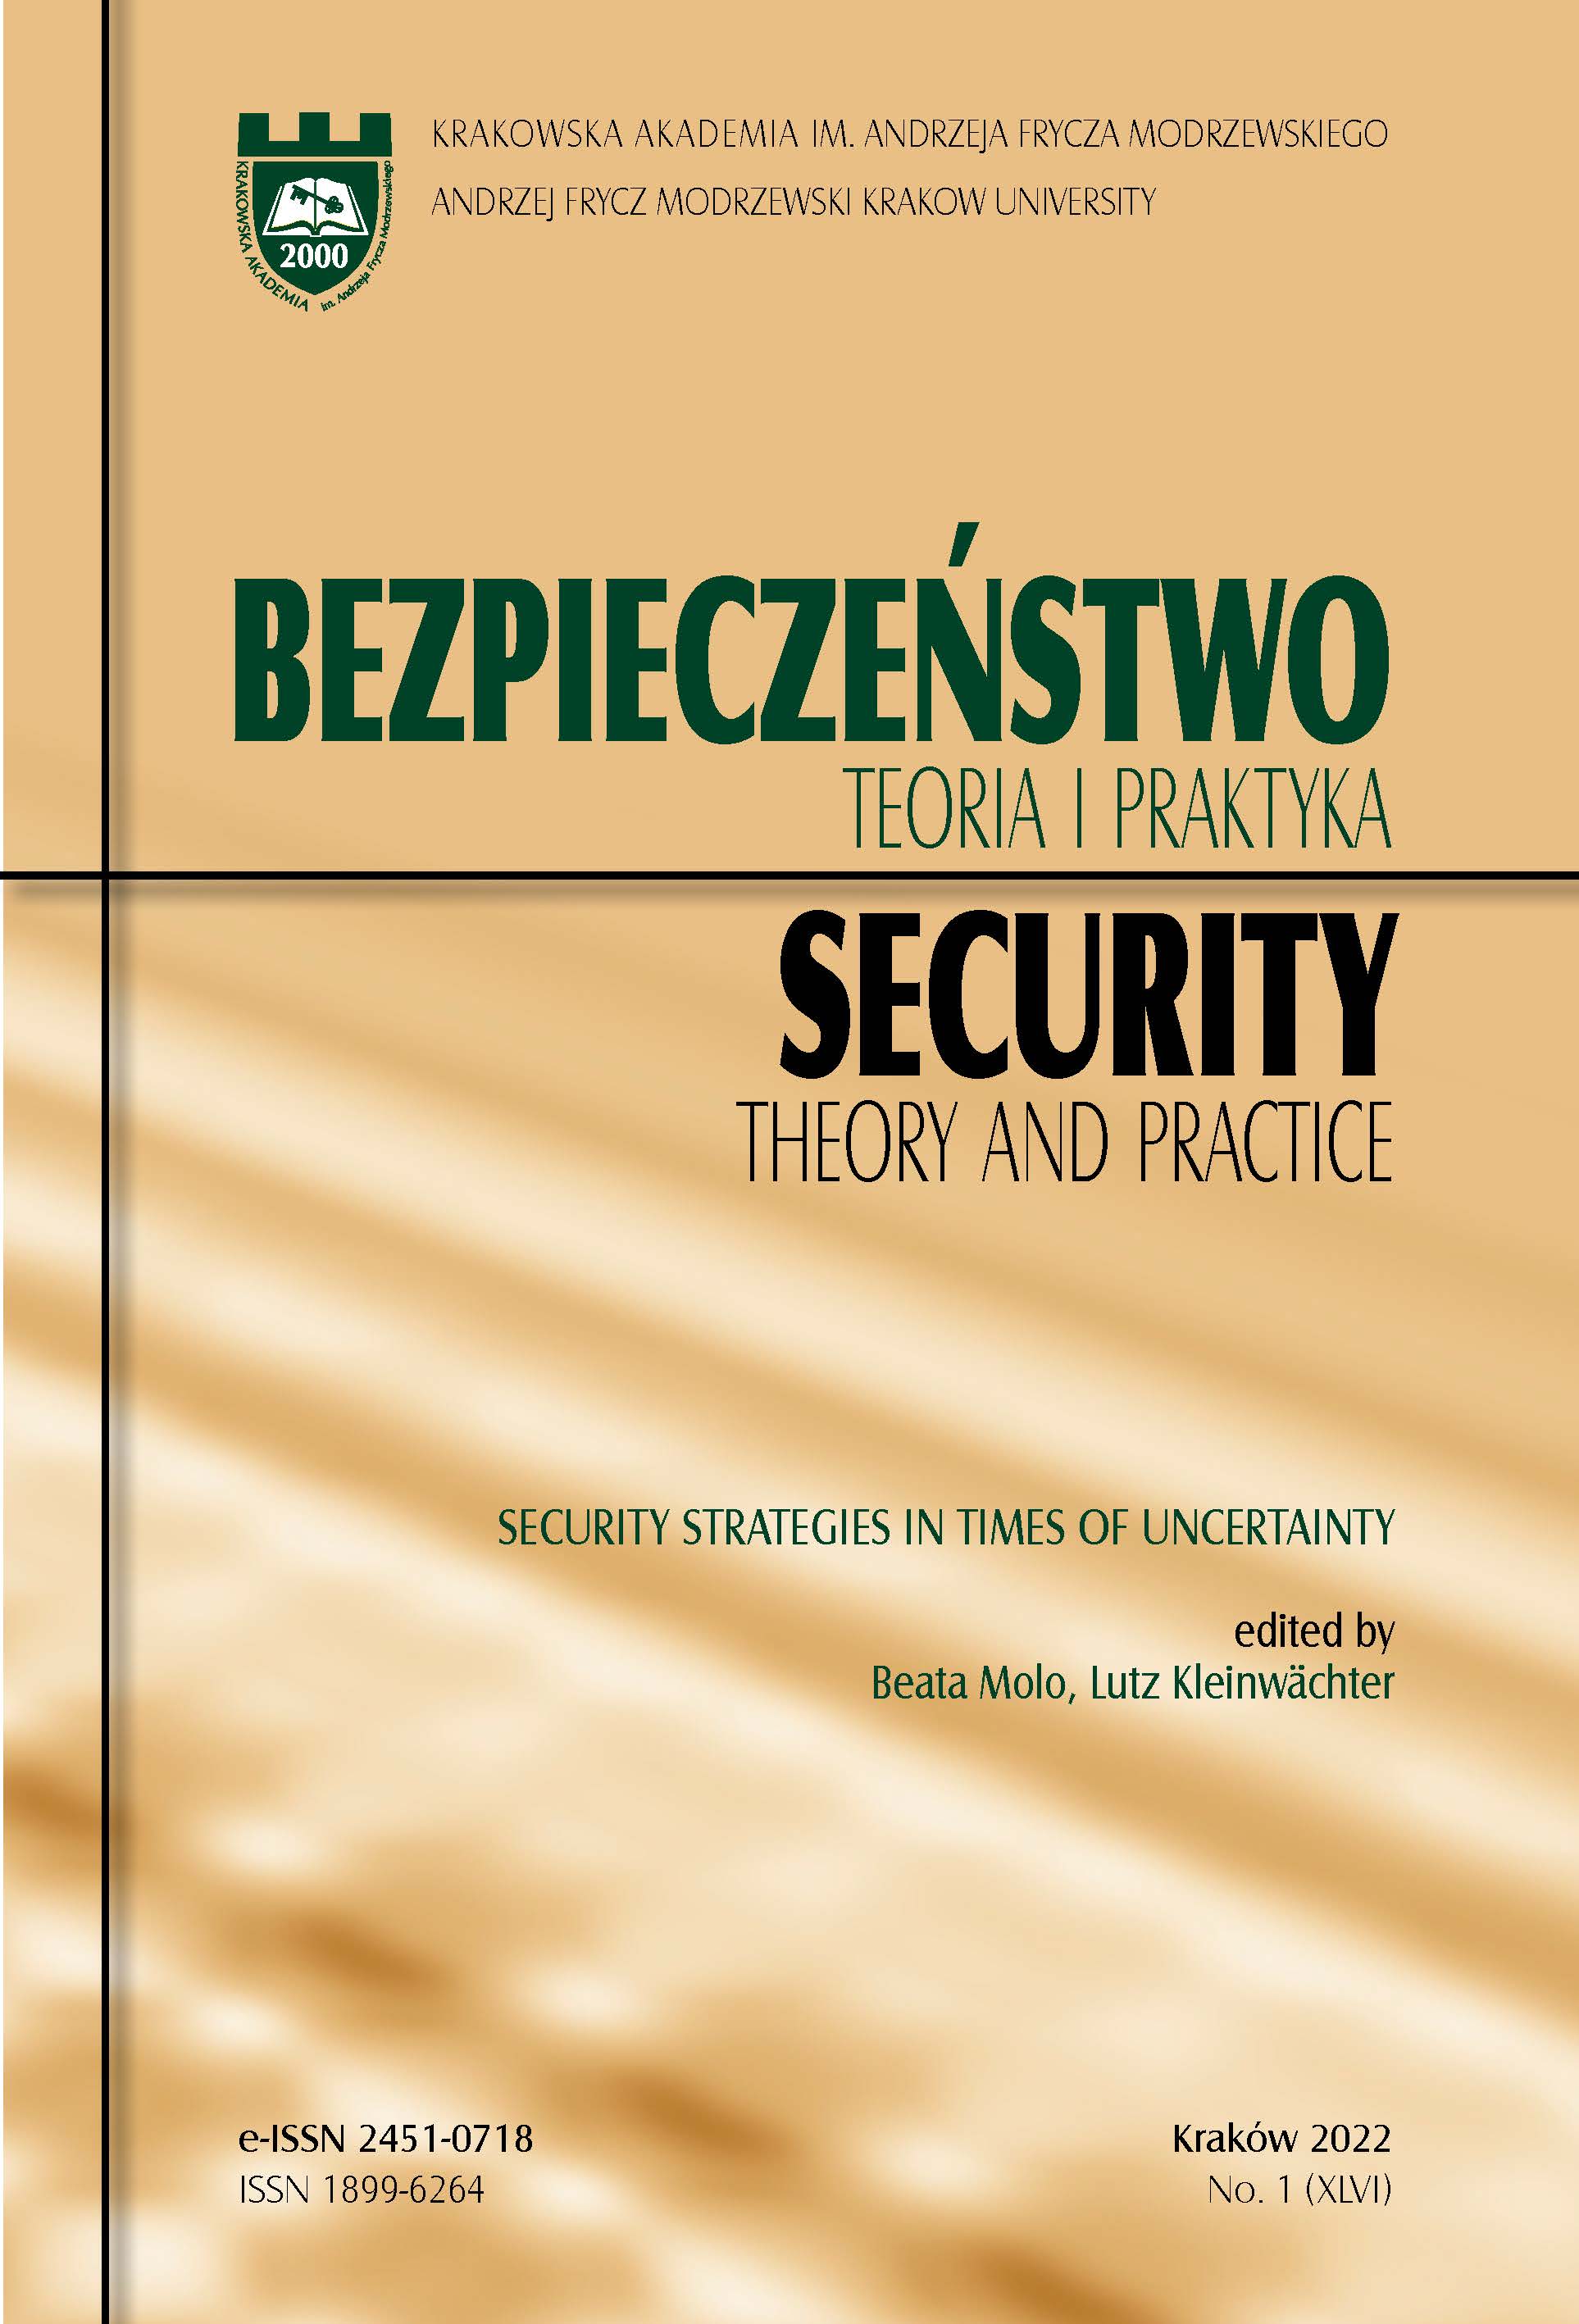 Defence policy of the Republic of Poland in the face of Russian aggression against Ukraine Cover Image